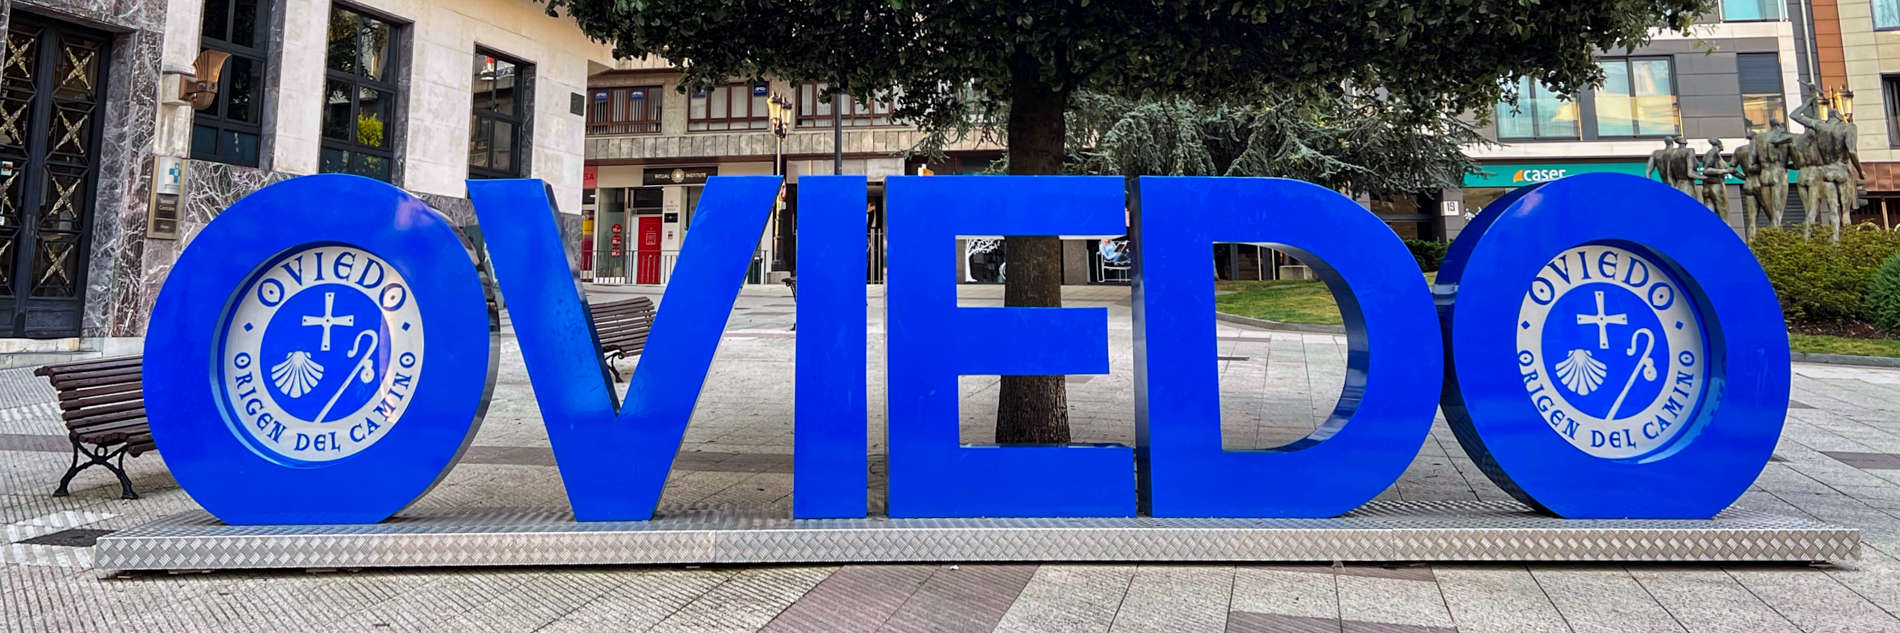 A blue letter sign for Oviedo in Spain. The wording in the 'O' letters reads "Oviedo. Origen Del Camino" - the origin city of the Camino de Santiago. 